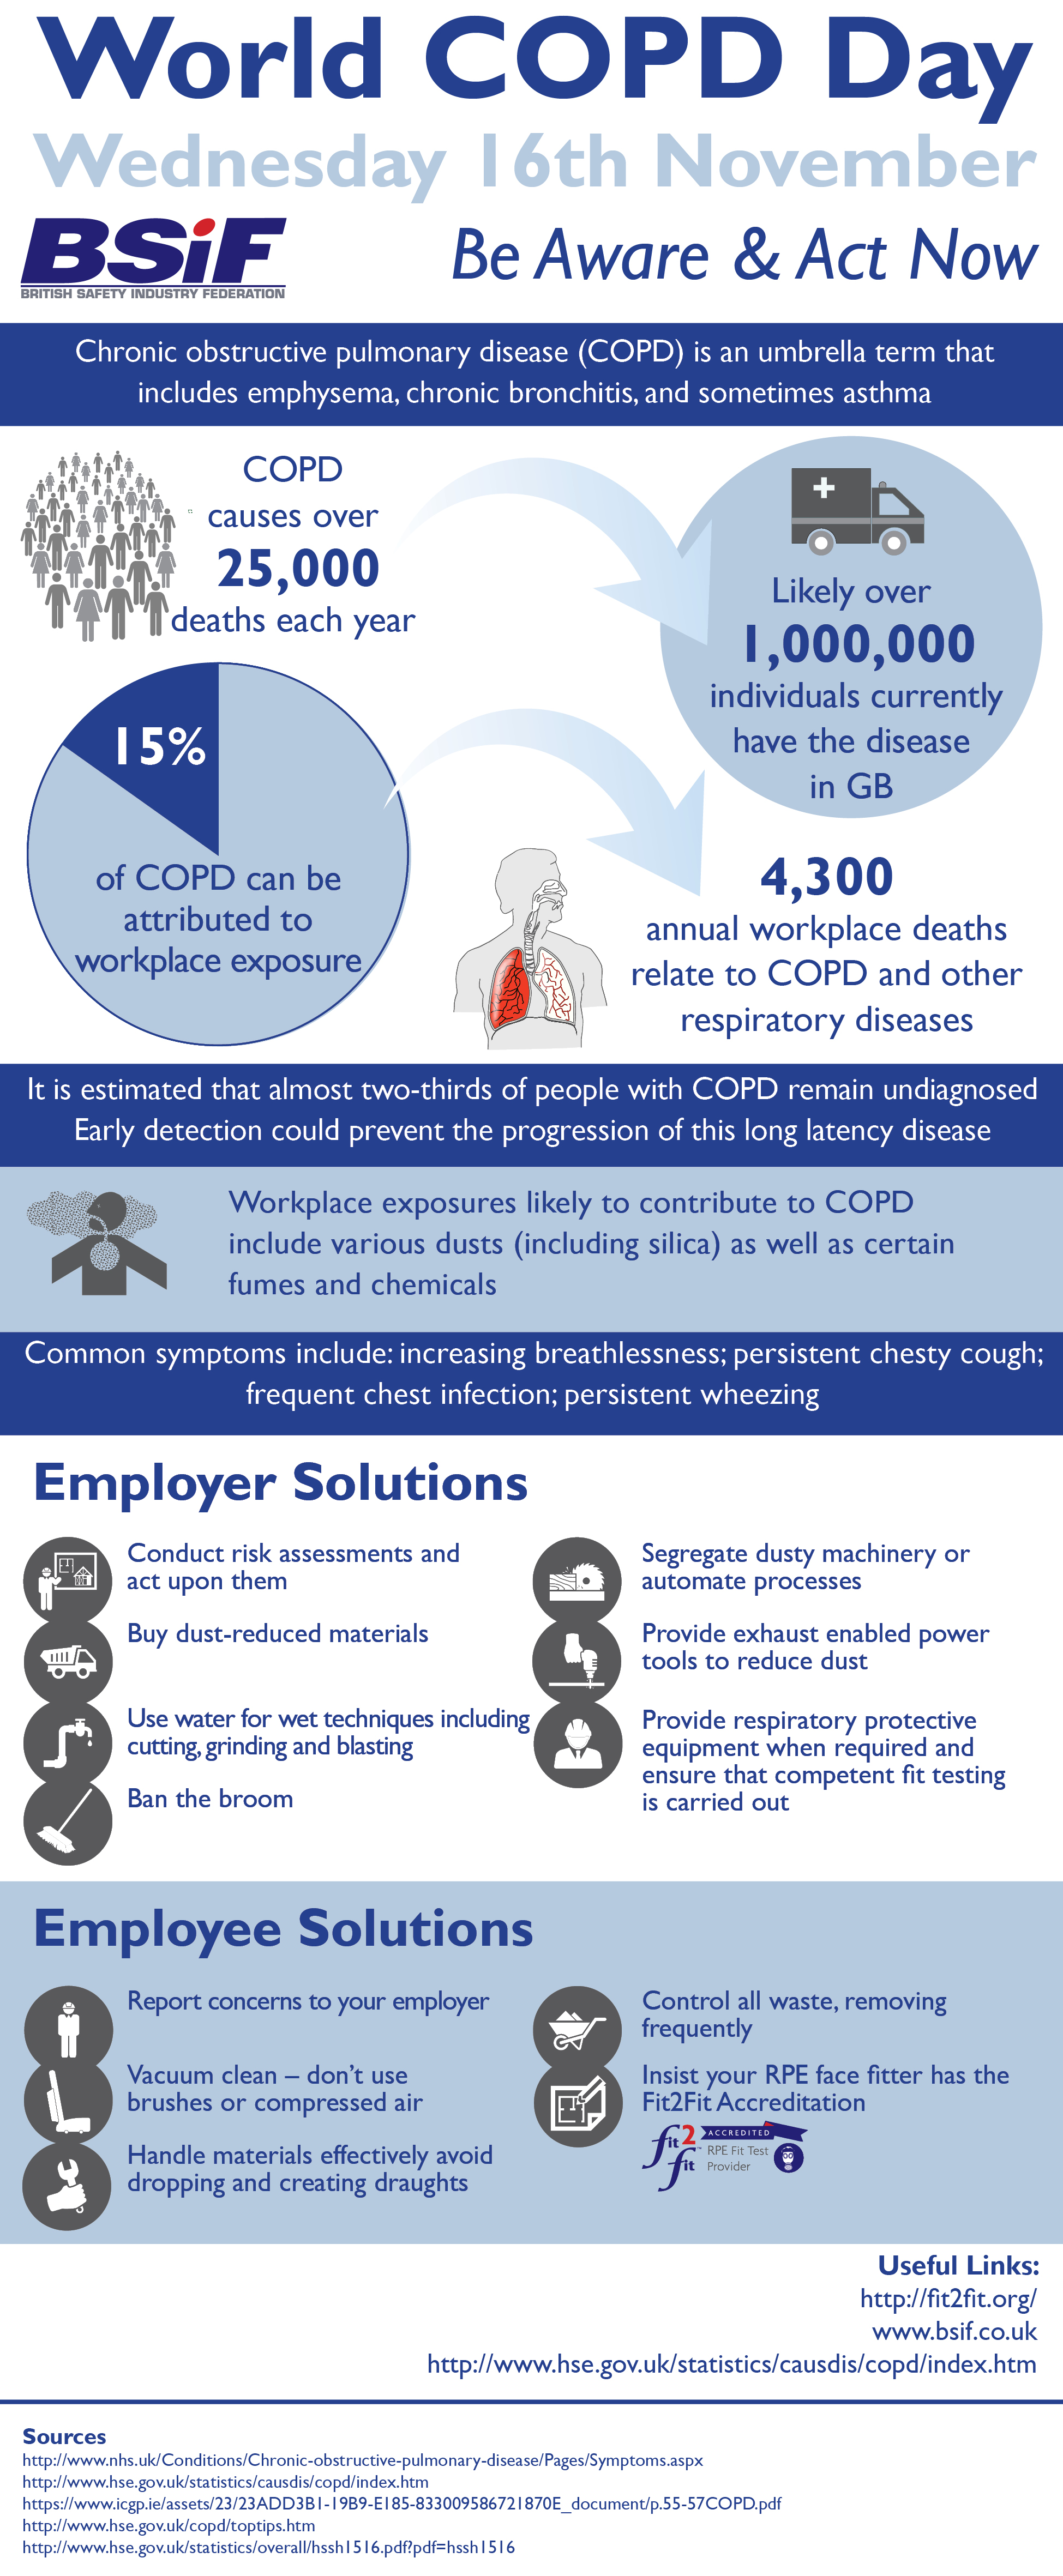 World COPD Day 2016